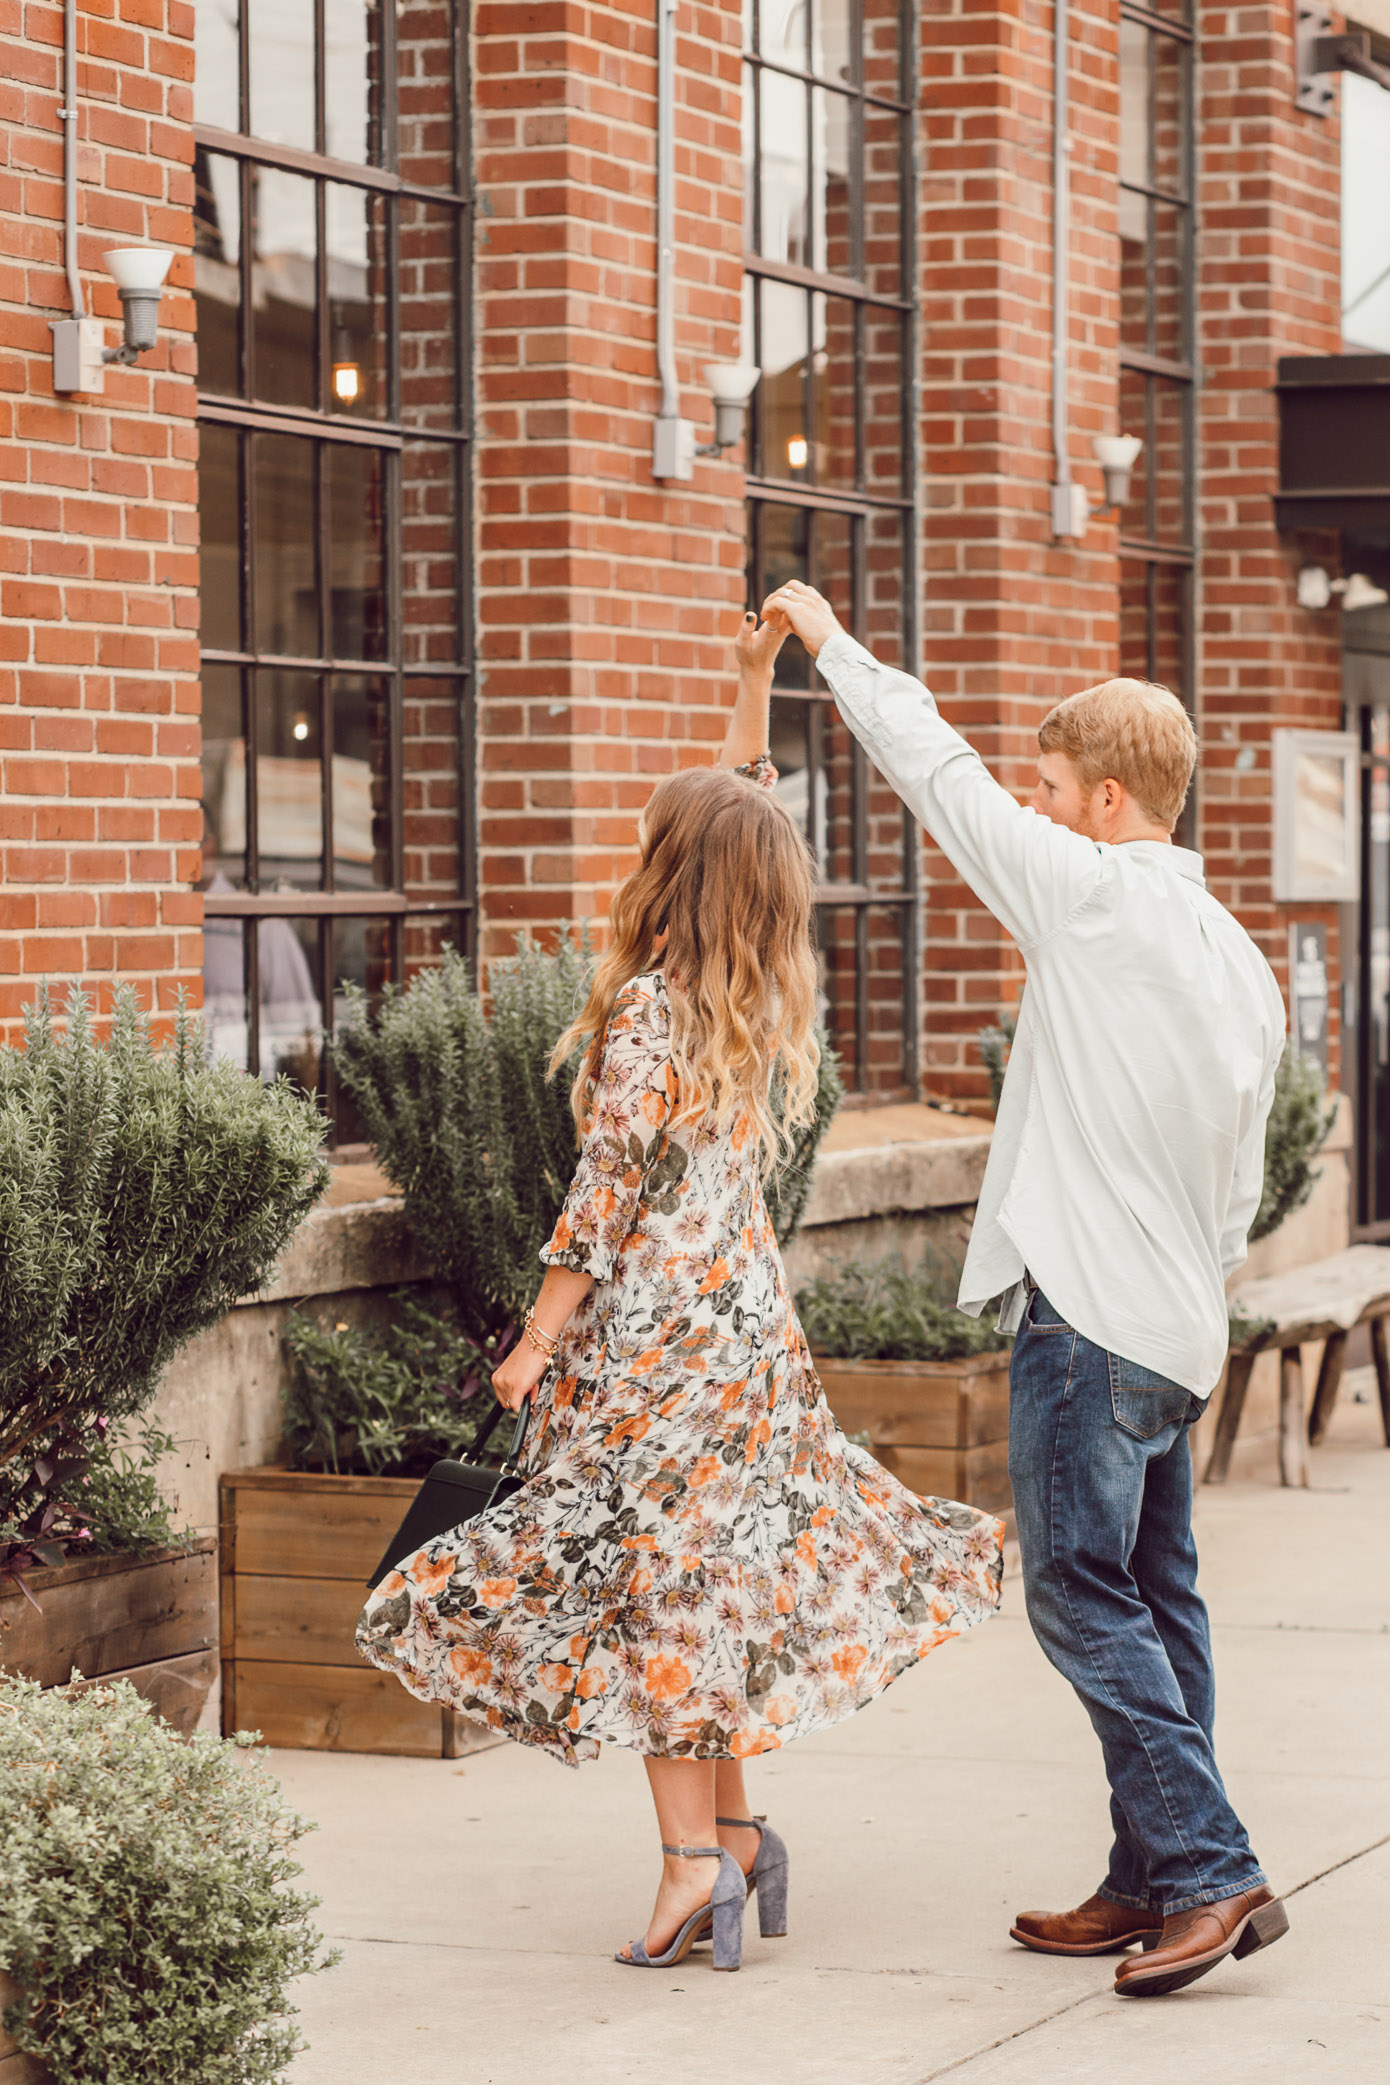 Fall Floral Midi Dress for Date Night | Date Night Beauty Tips featured on Louella Reese Life & Style Blog